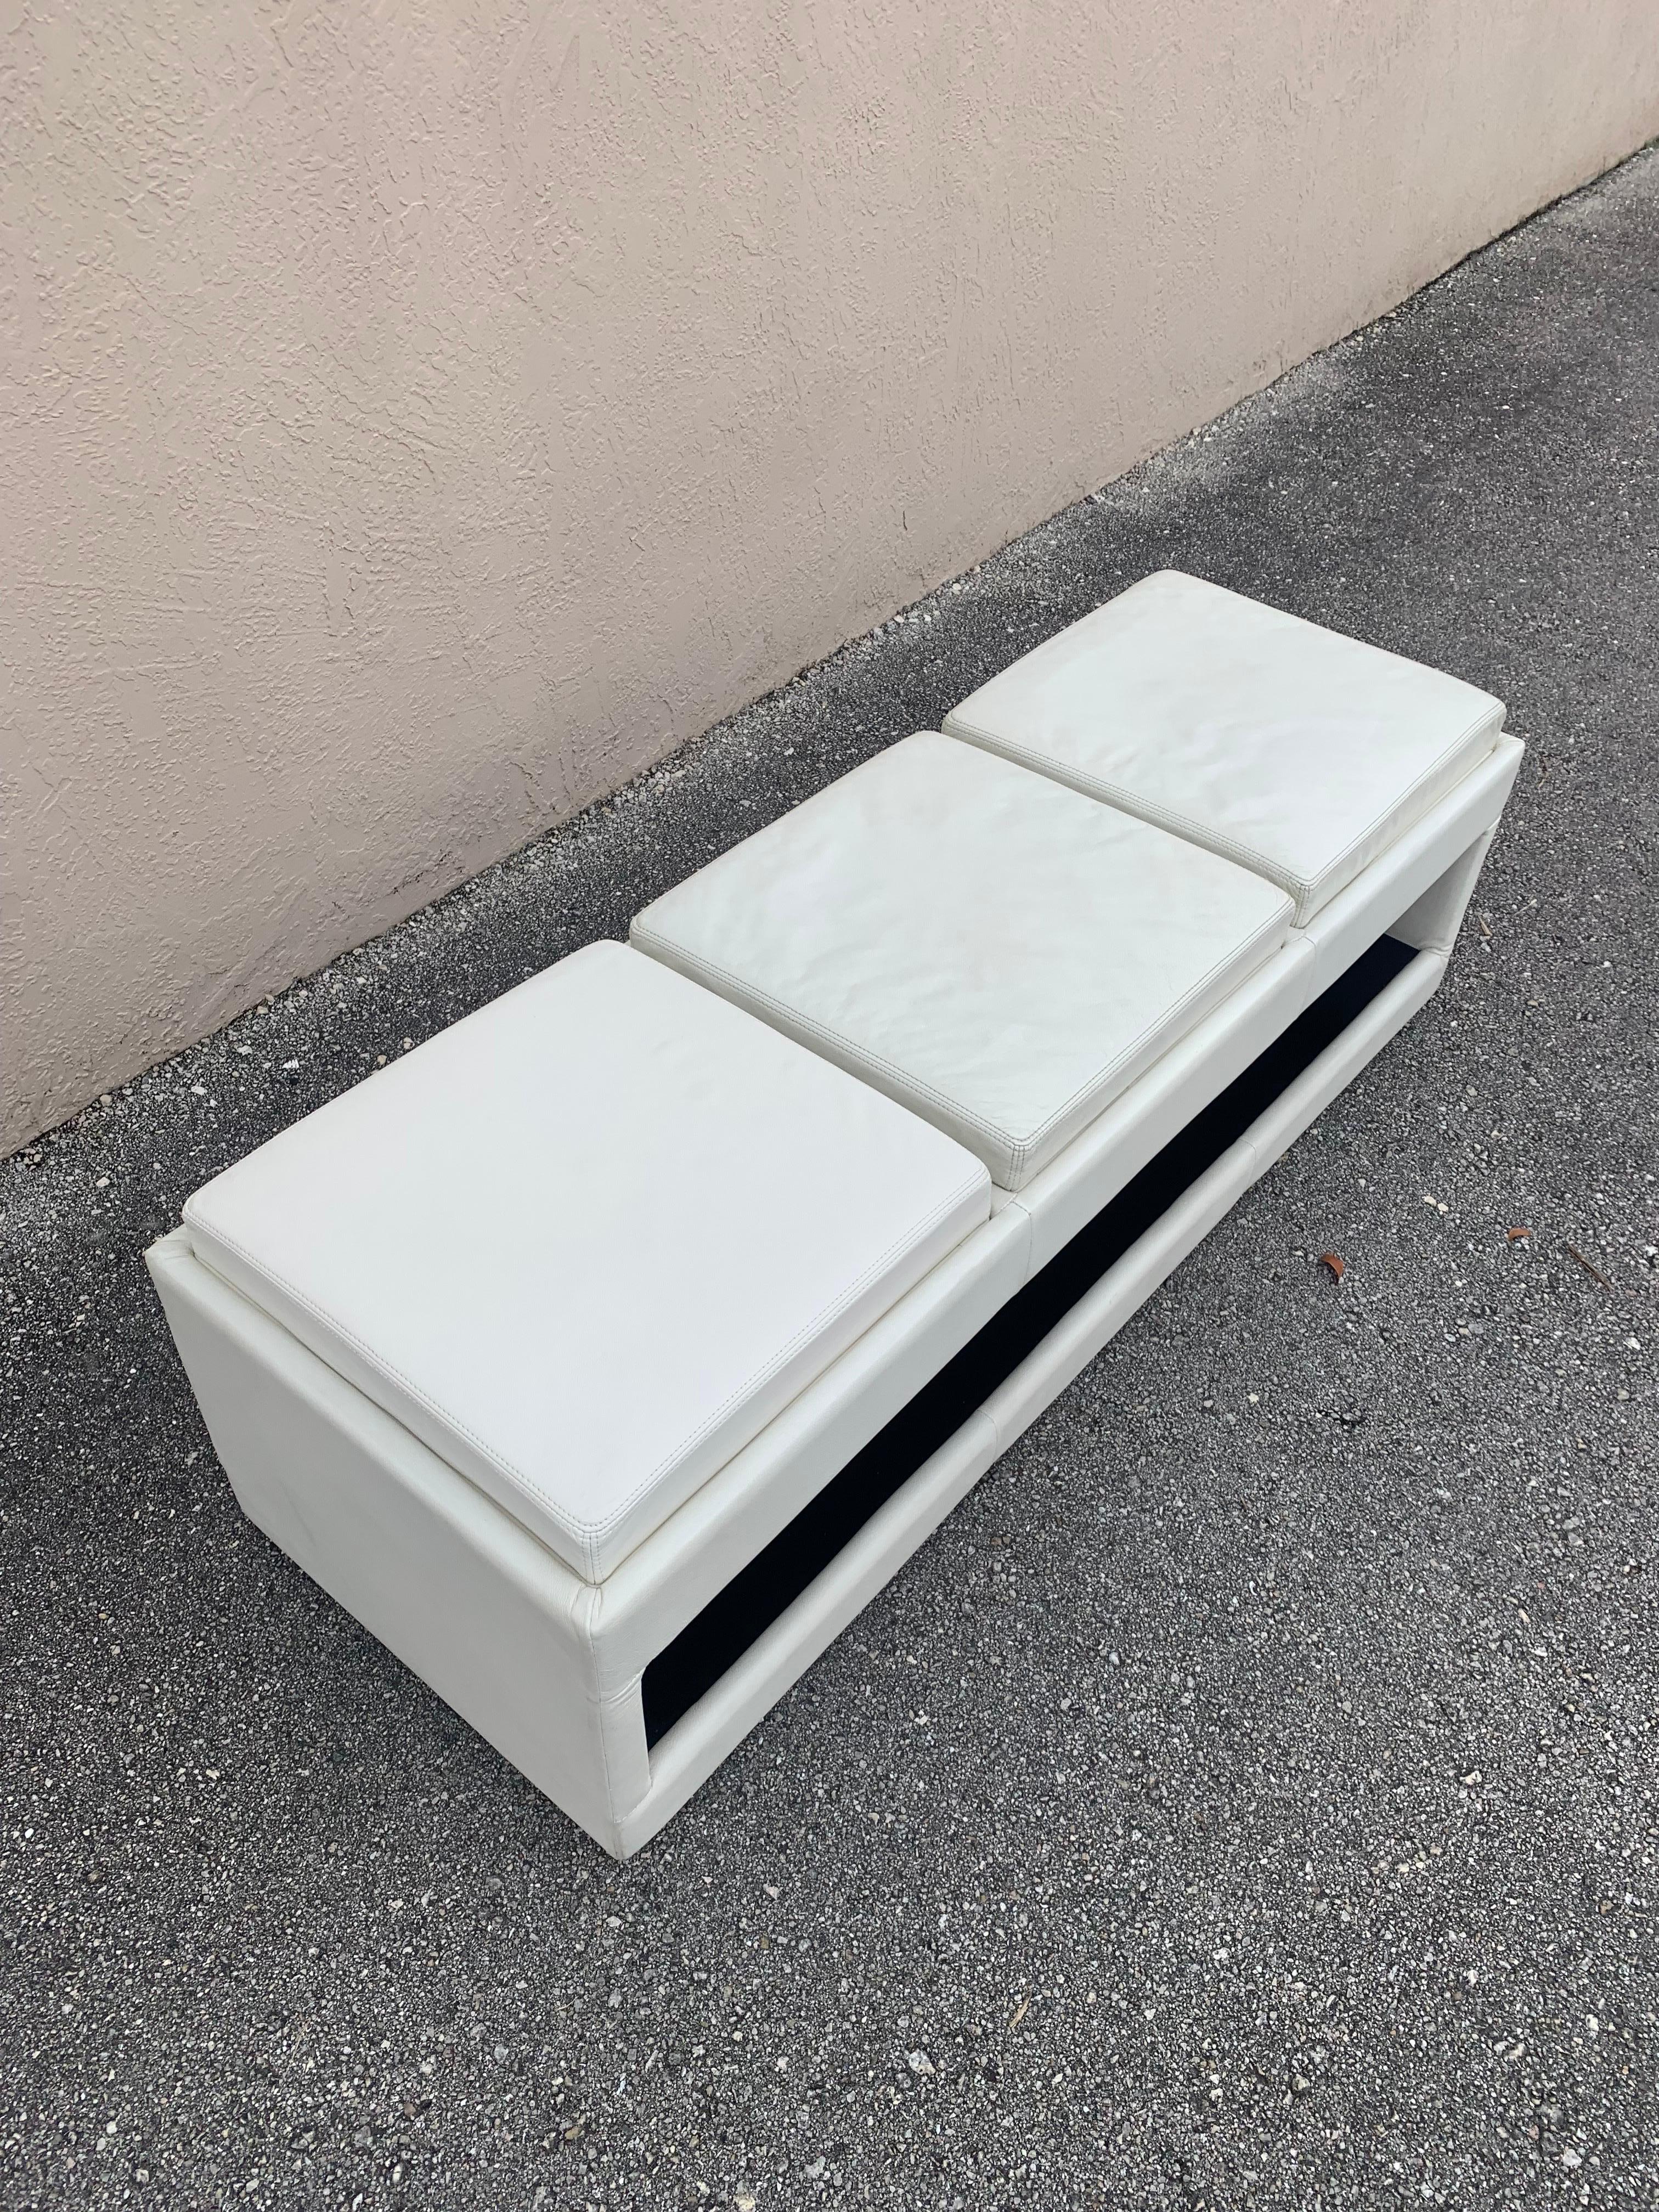 American Leather 3 Seat Bench in White In Good Condition For Sale In Boynton Beach, FL